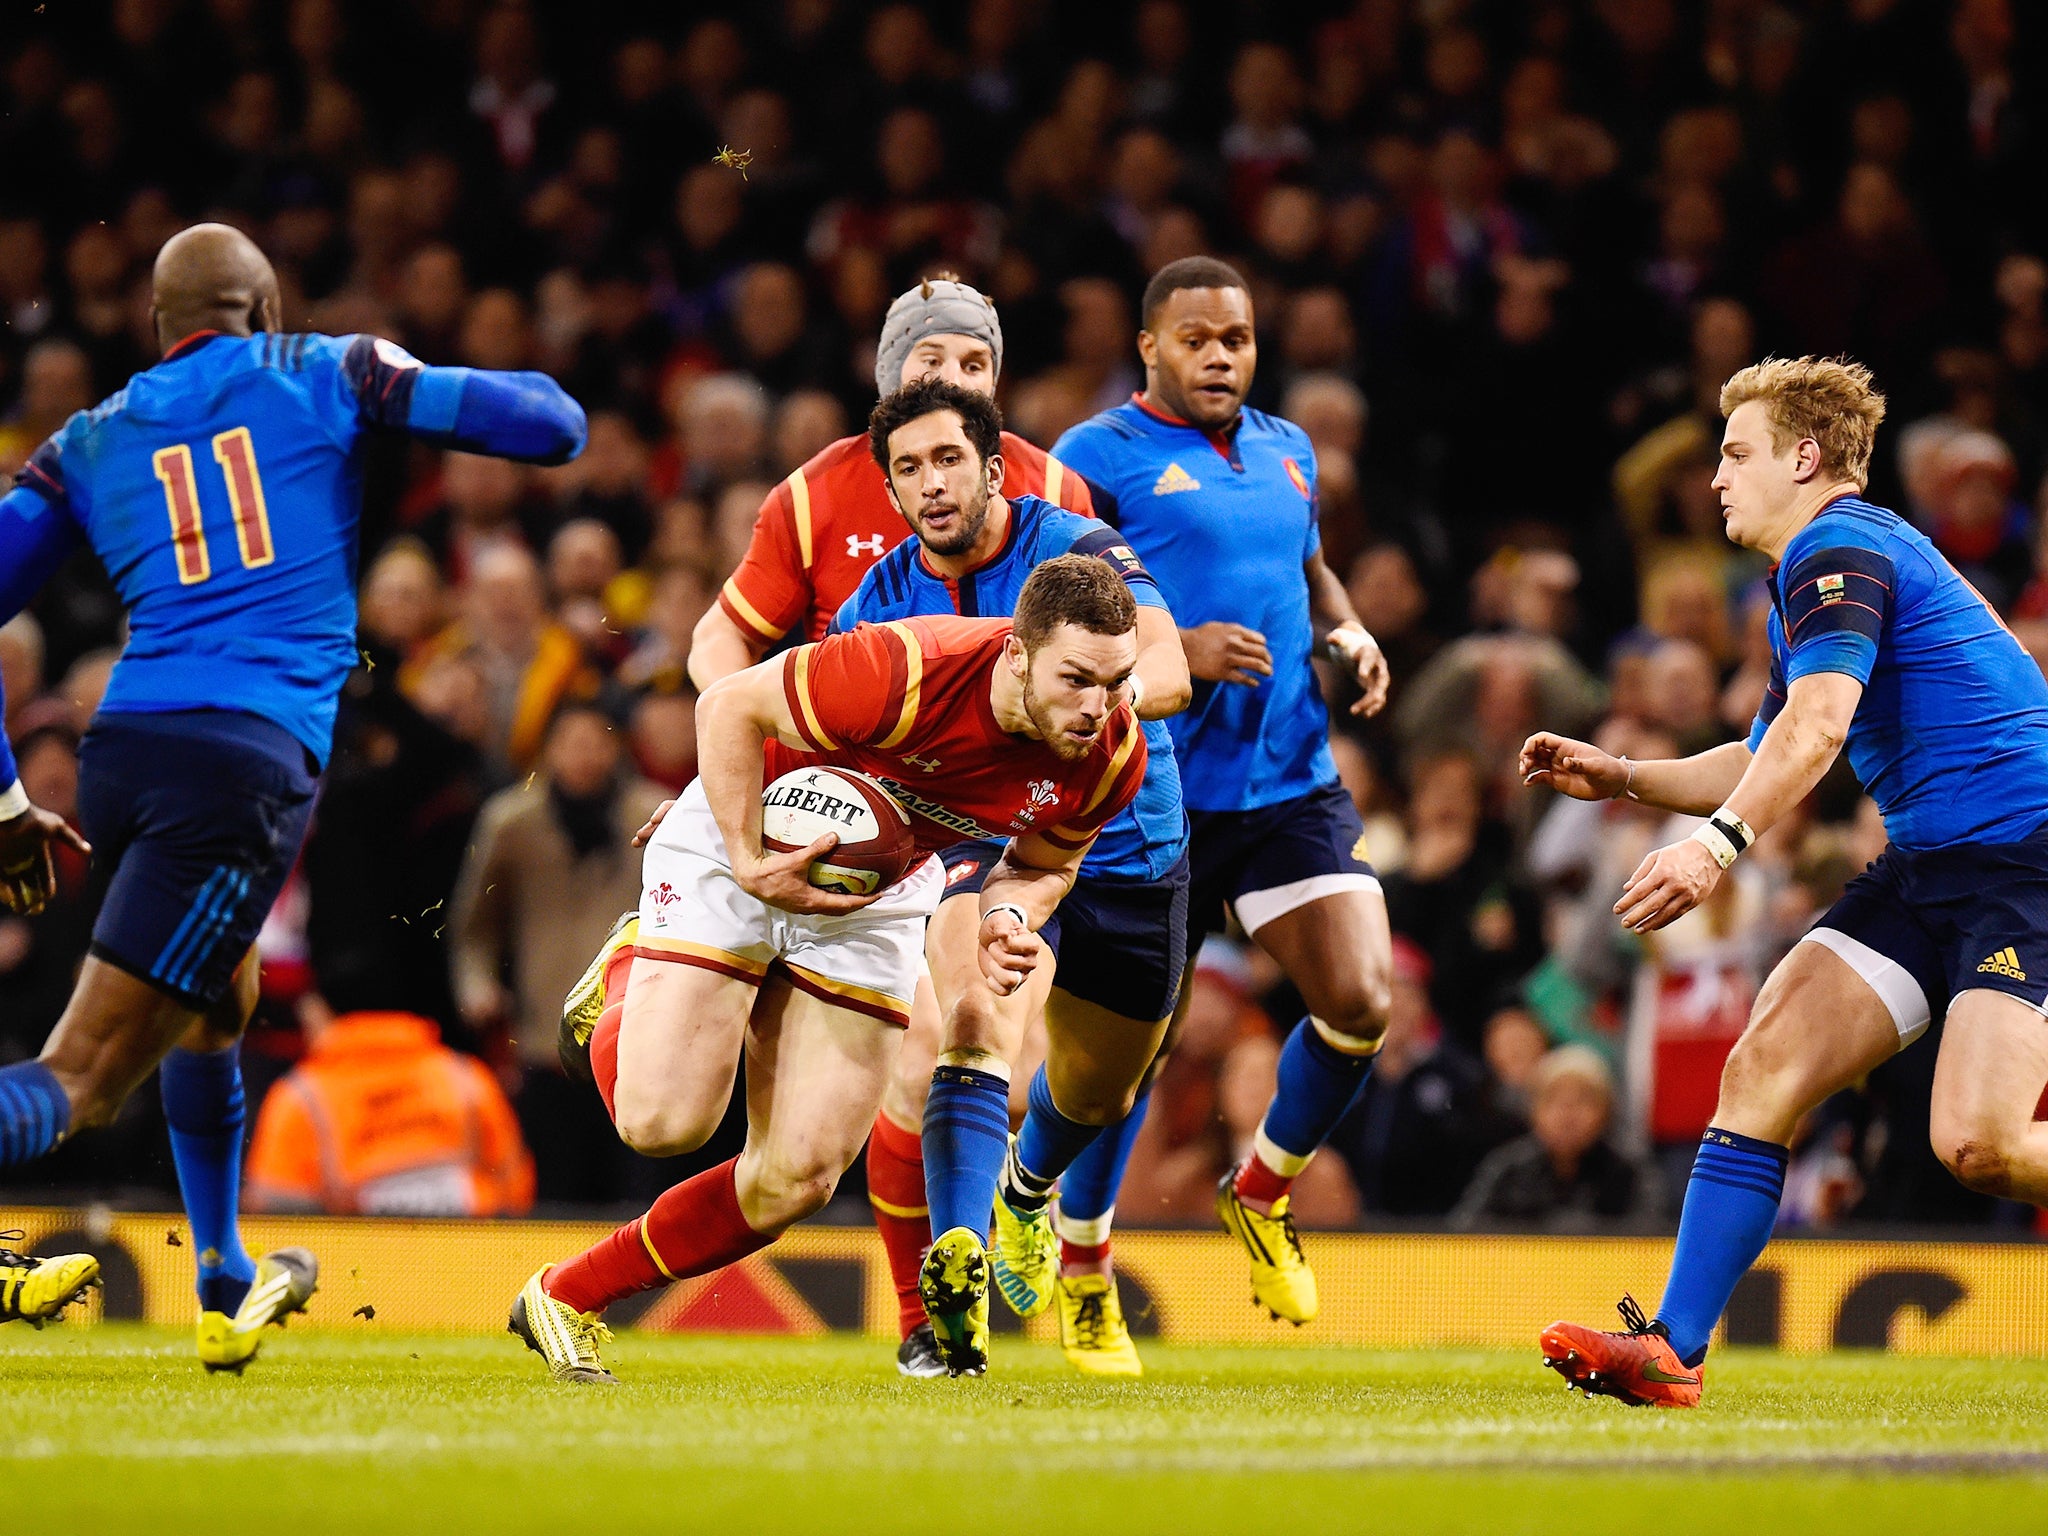 George North of Wales crashes over the line to score the opening try during the RBS Six Nations match between Wales and France at the Principality Stadium.